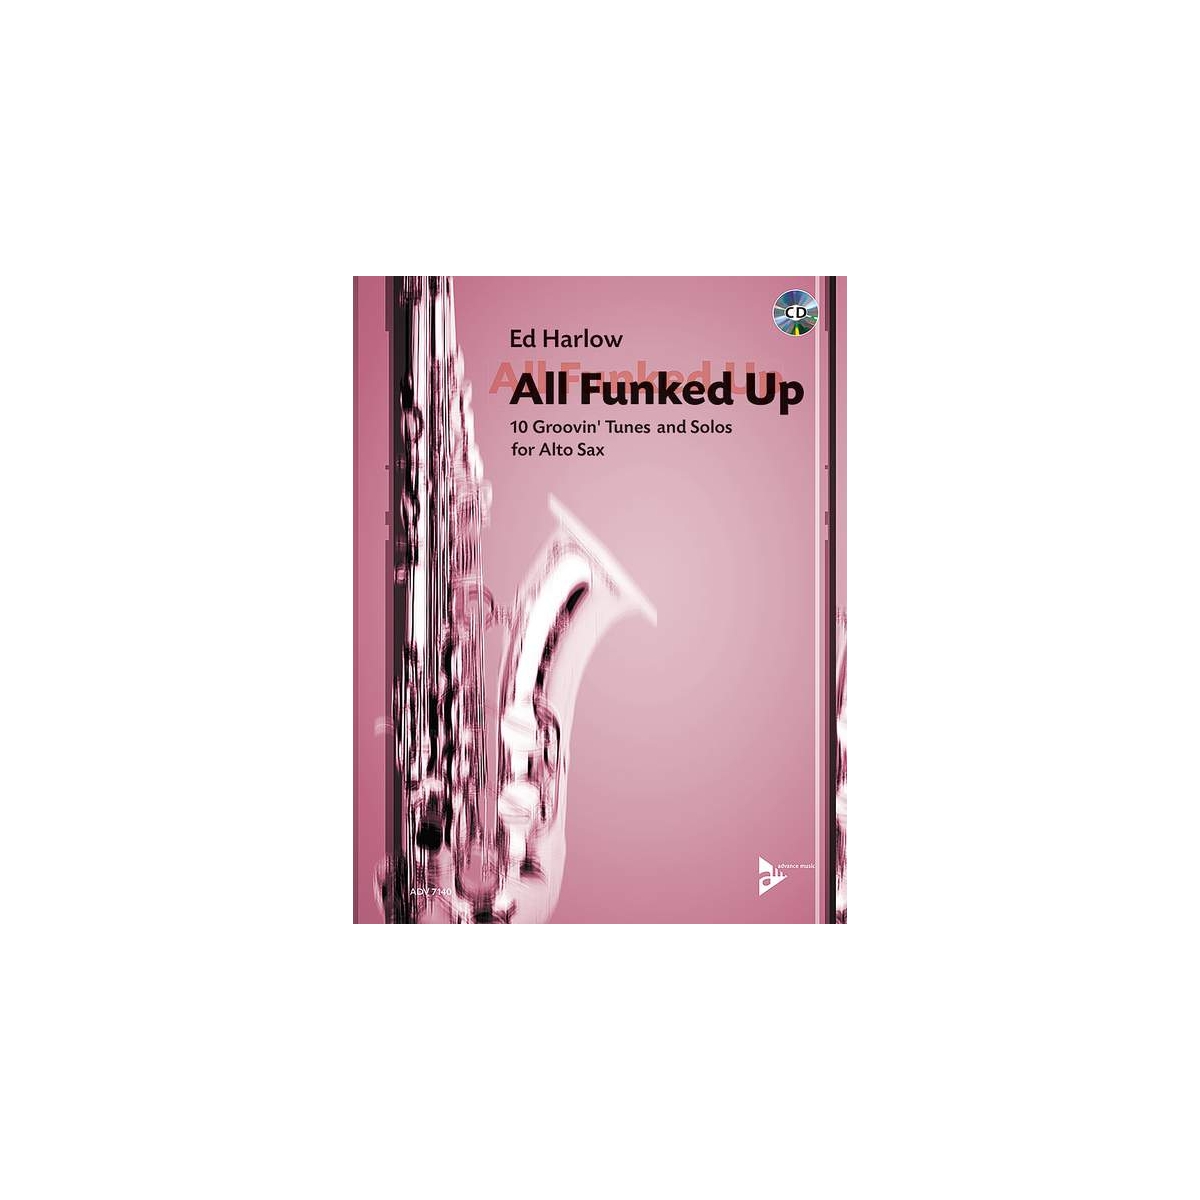 All Funked Up: 10 Groovin' Tunes and Solos for Alto Sax